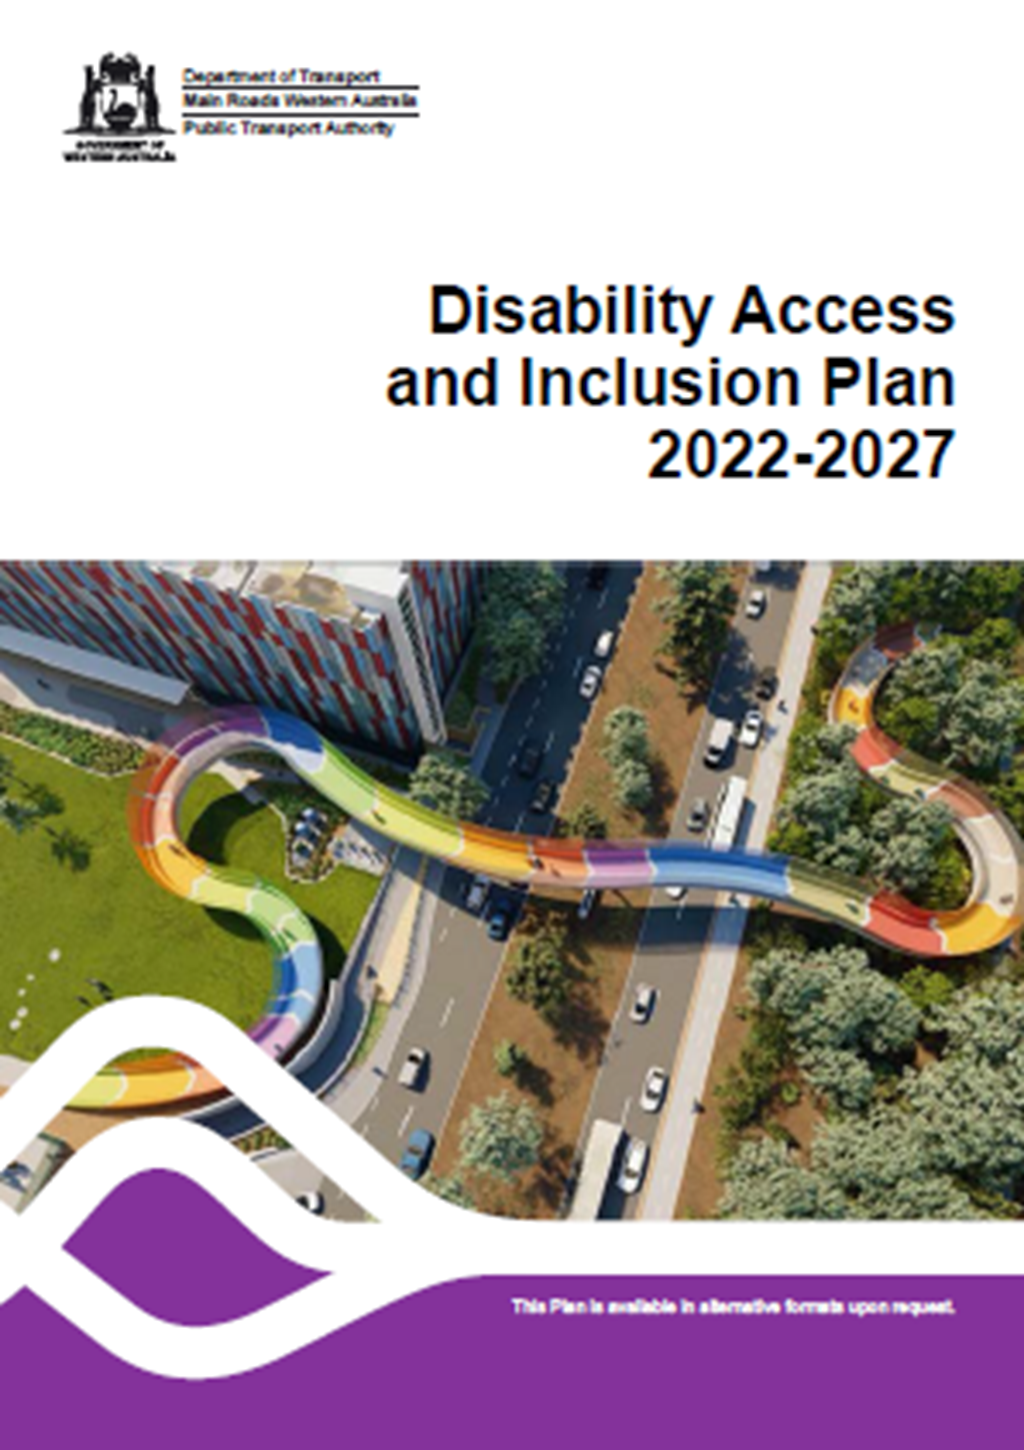 Front cover of the Disability Access and Inclusion Plan (DAIP) 2022-27